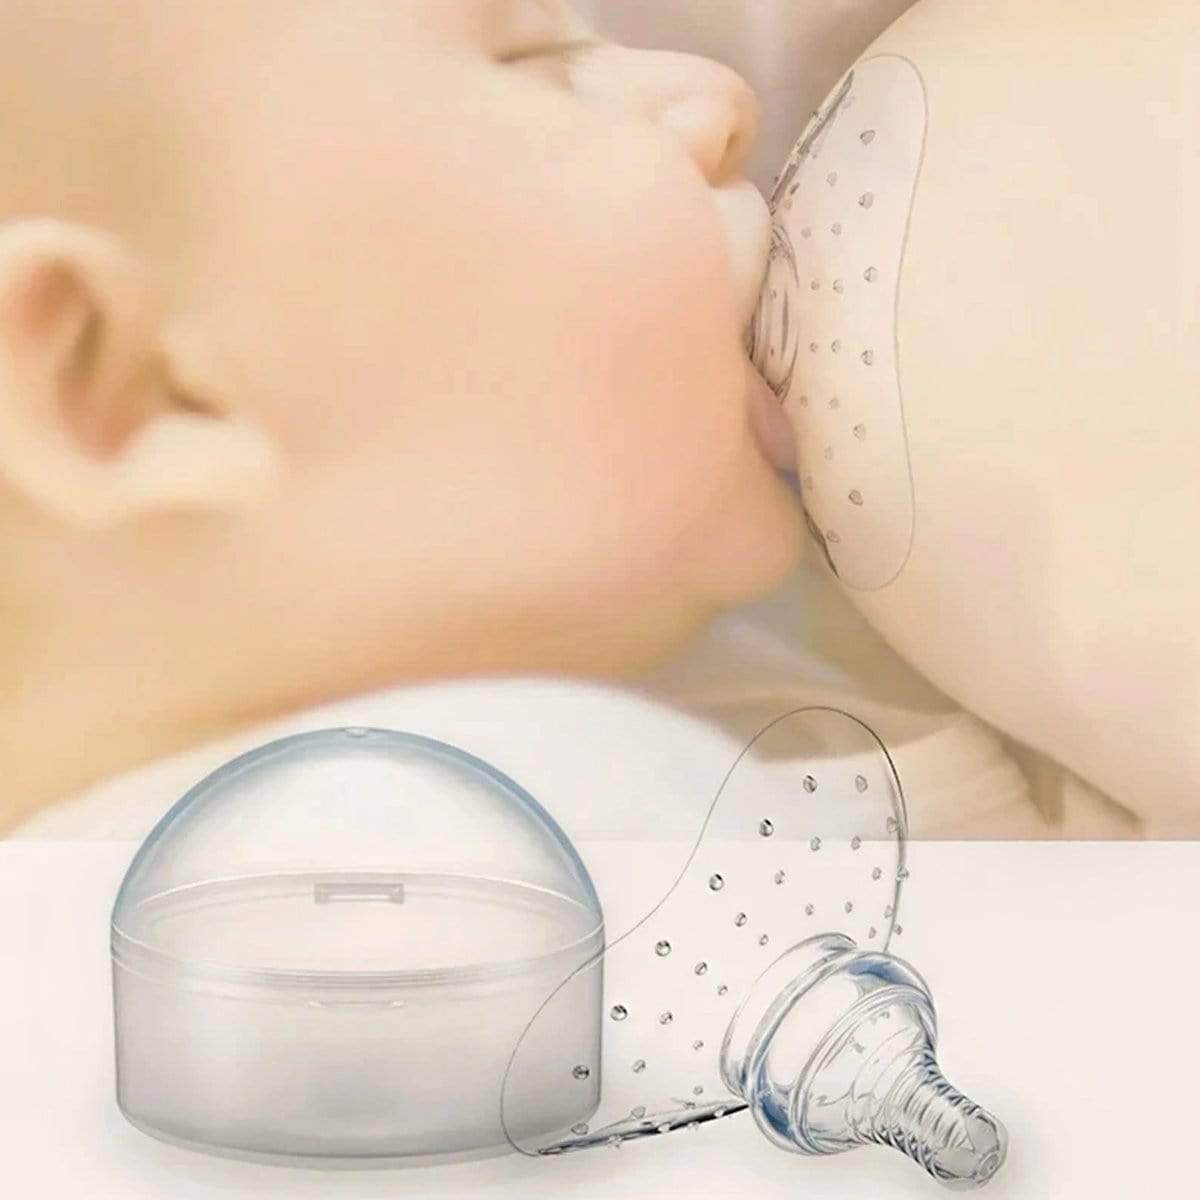 Stamens The Breast-Feeding Machine,Silicone Baby Nipple Protector Breastfeeding Protection Shields Cover Breast Pad